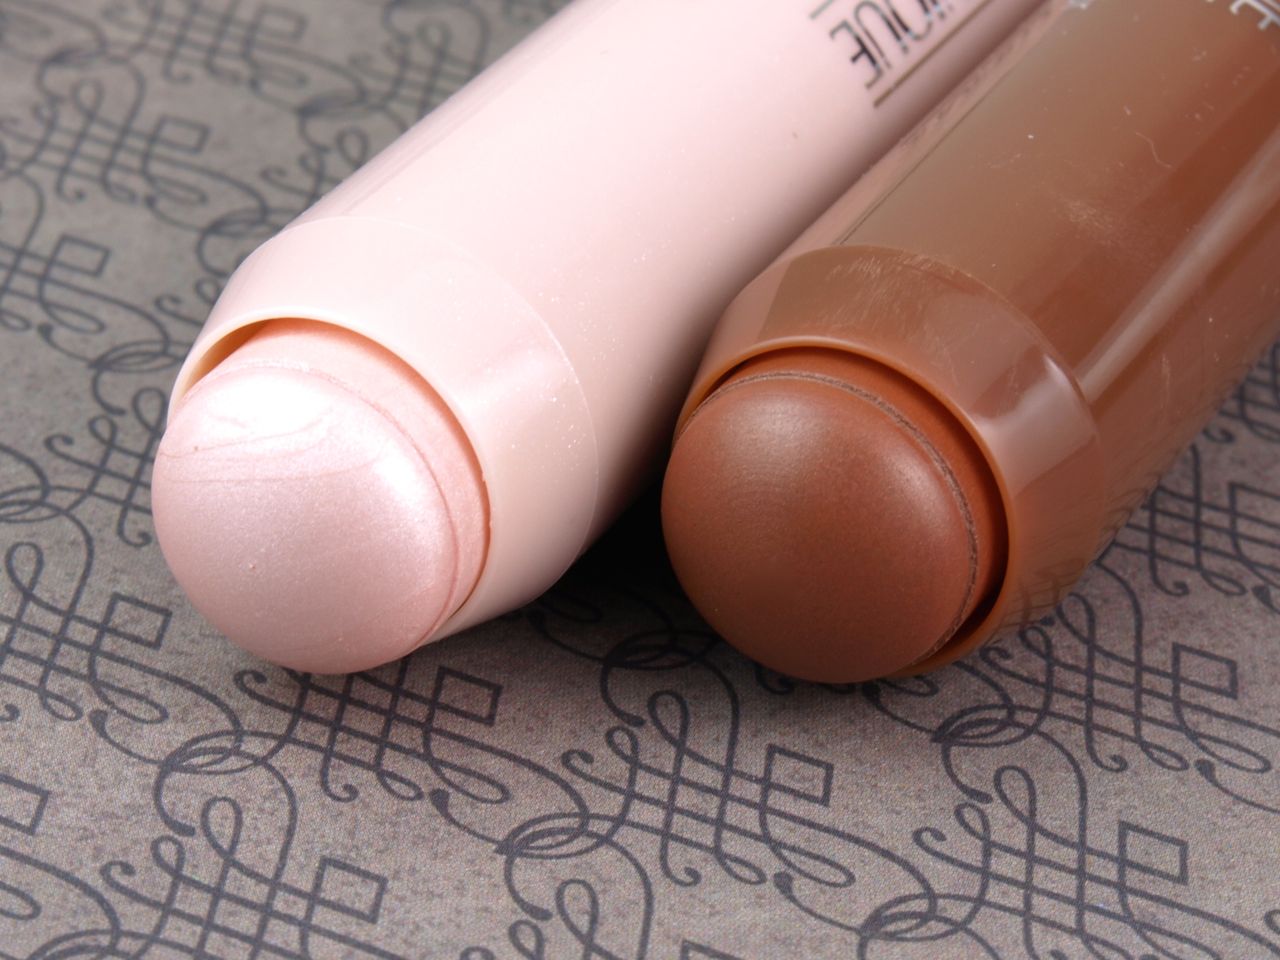 Clinique Chubby Stick Sculpting Contour & Sculpting Highlight: Review and Swatches